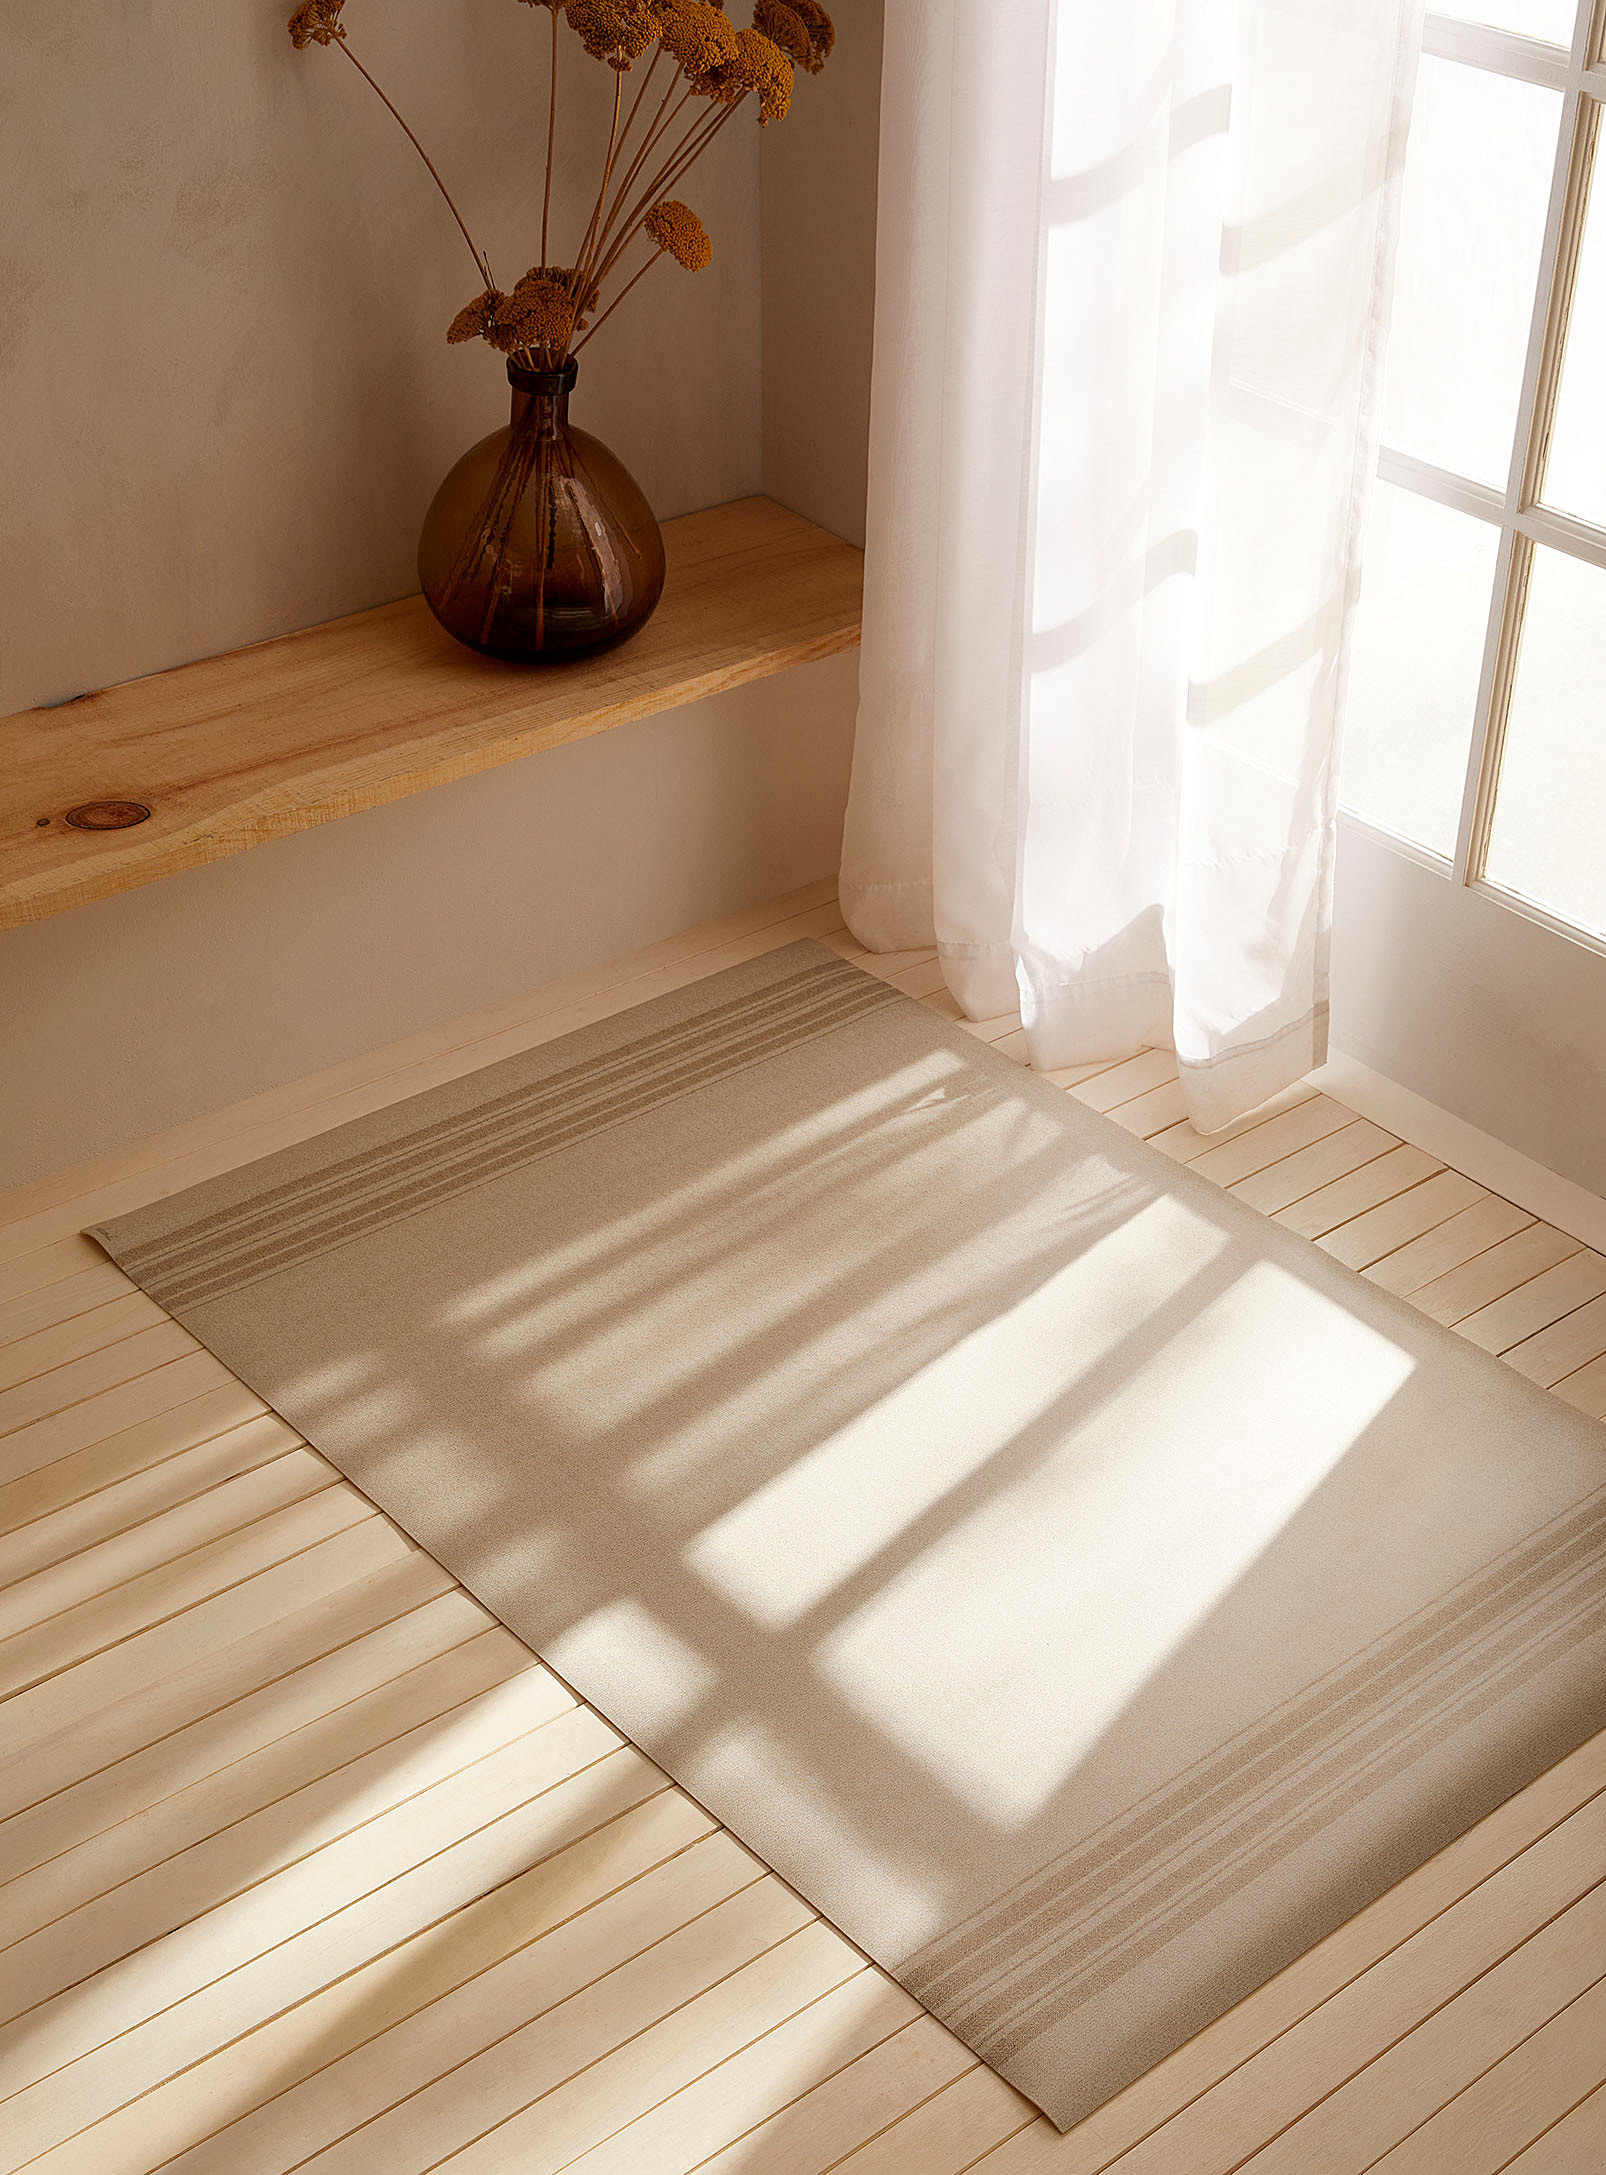 Adama Nuanced Lines Vinyl Mat See Available Sizes In Cream Beige